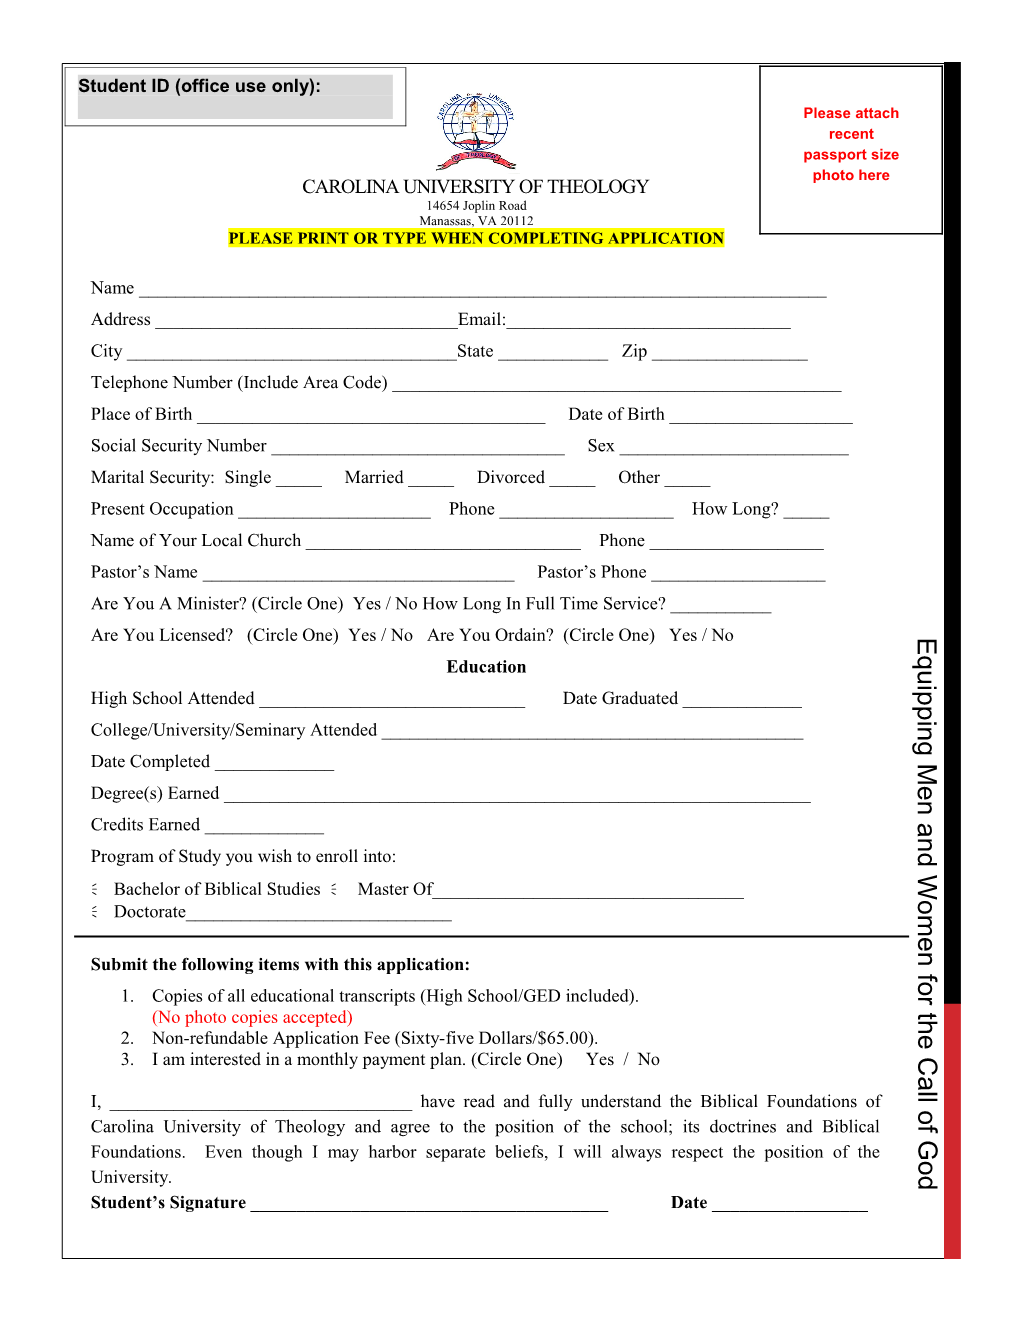 Please Print Or Type When Completing Application